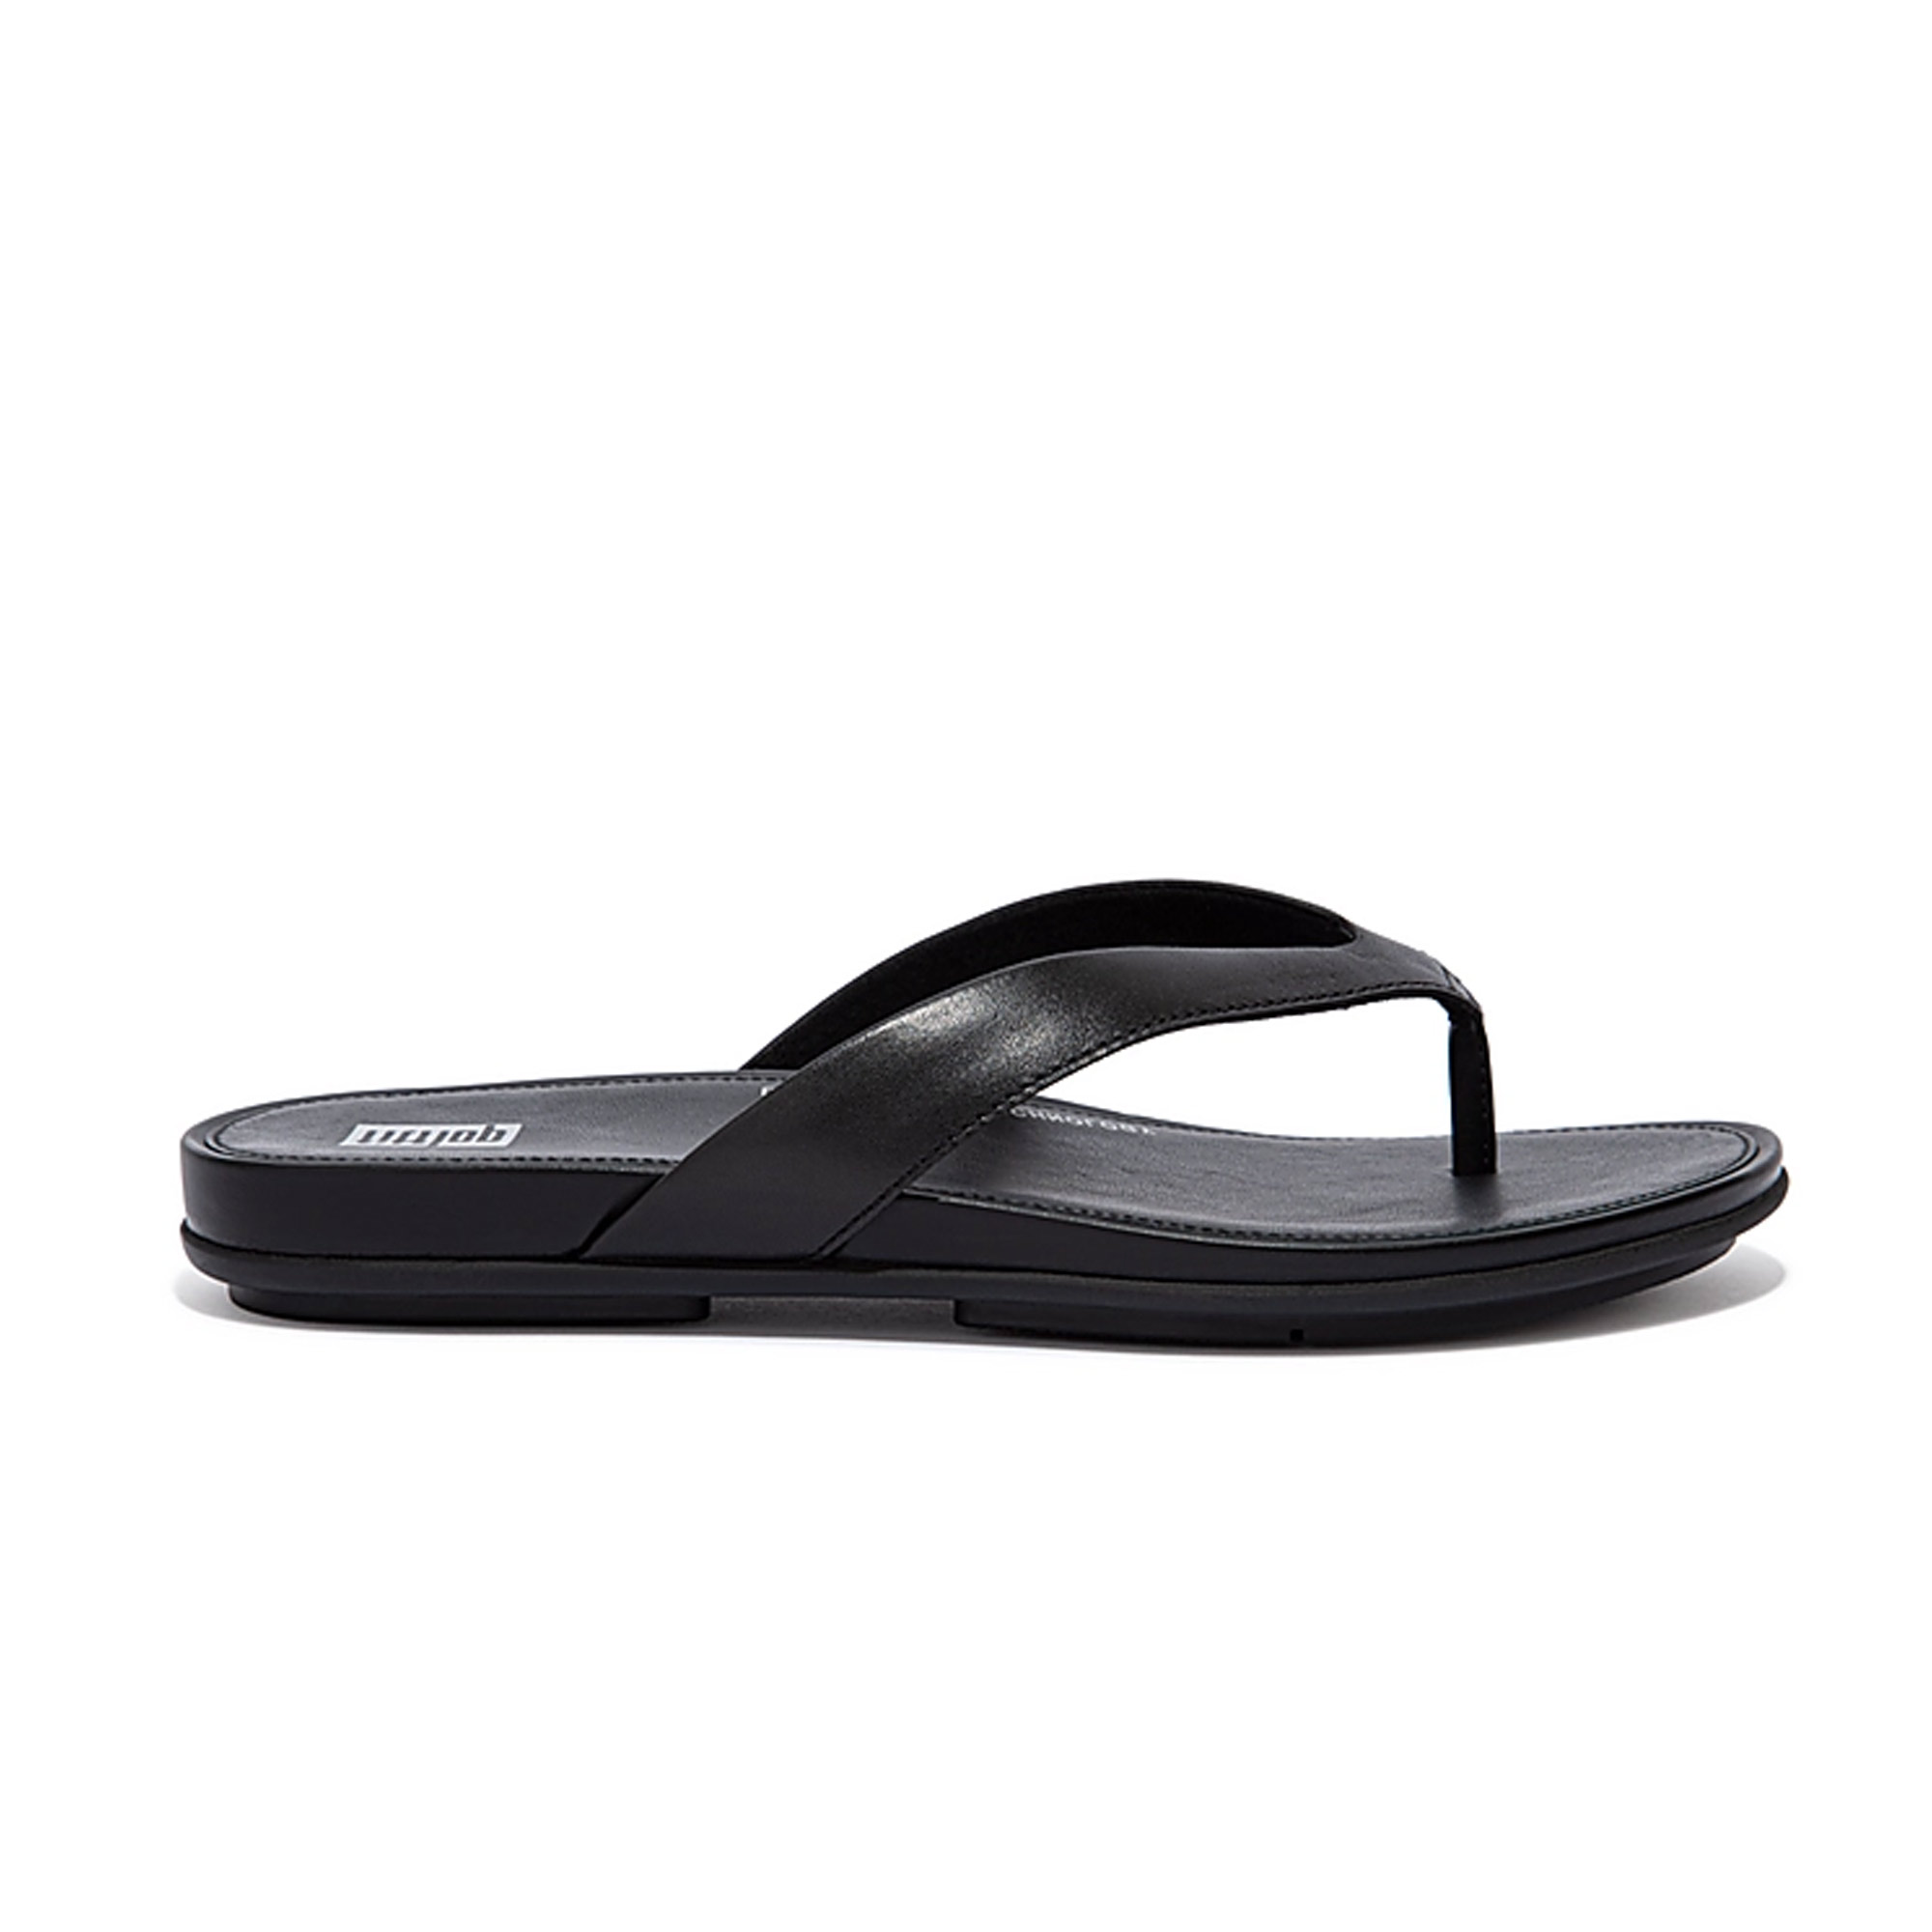 FITFLOP Gracie Leather Flip-Flops for Women - Black - Chaussures